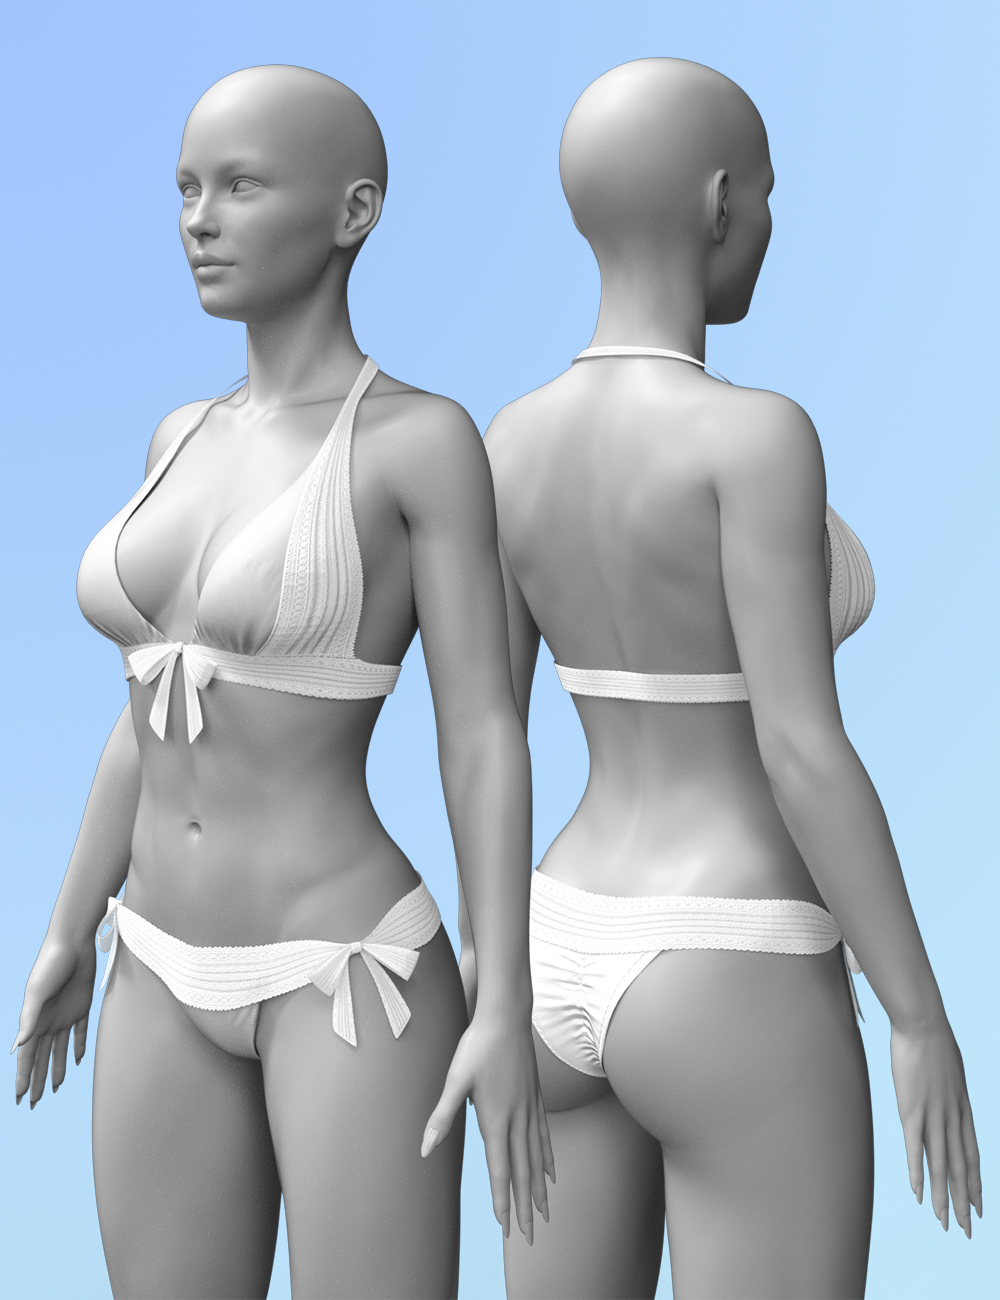 X Fashion Bikini Bows Lace for Genesis 8 and 8.1 Females by: xtrart-3d, 3D Models by Daz 3D